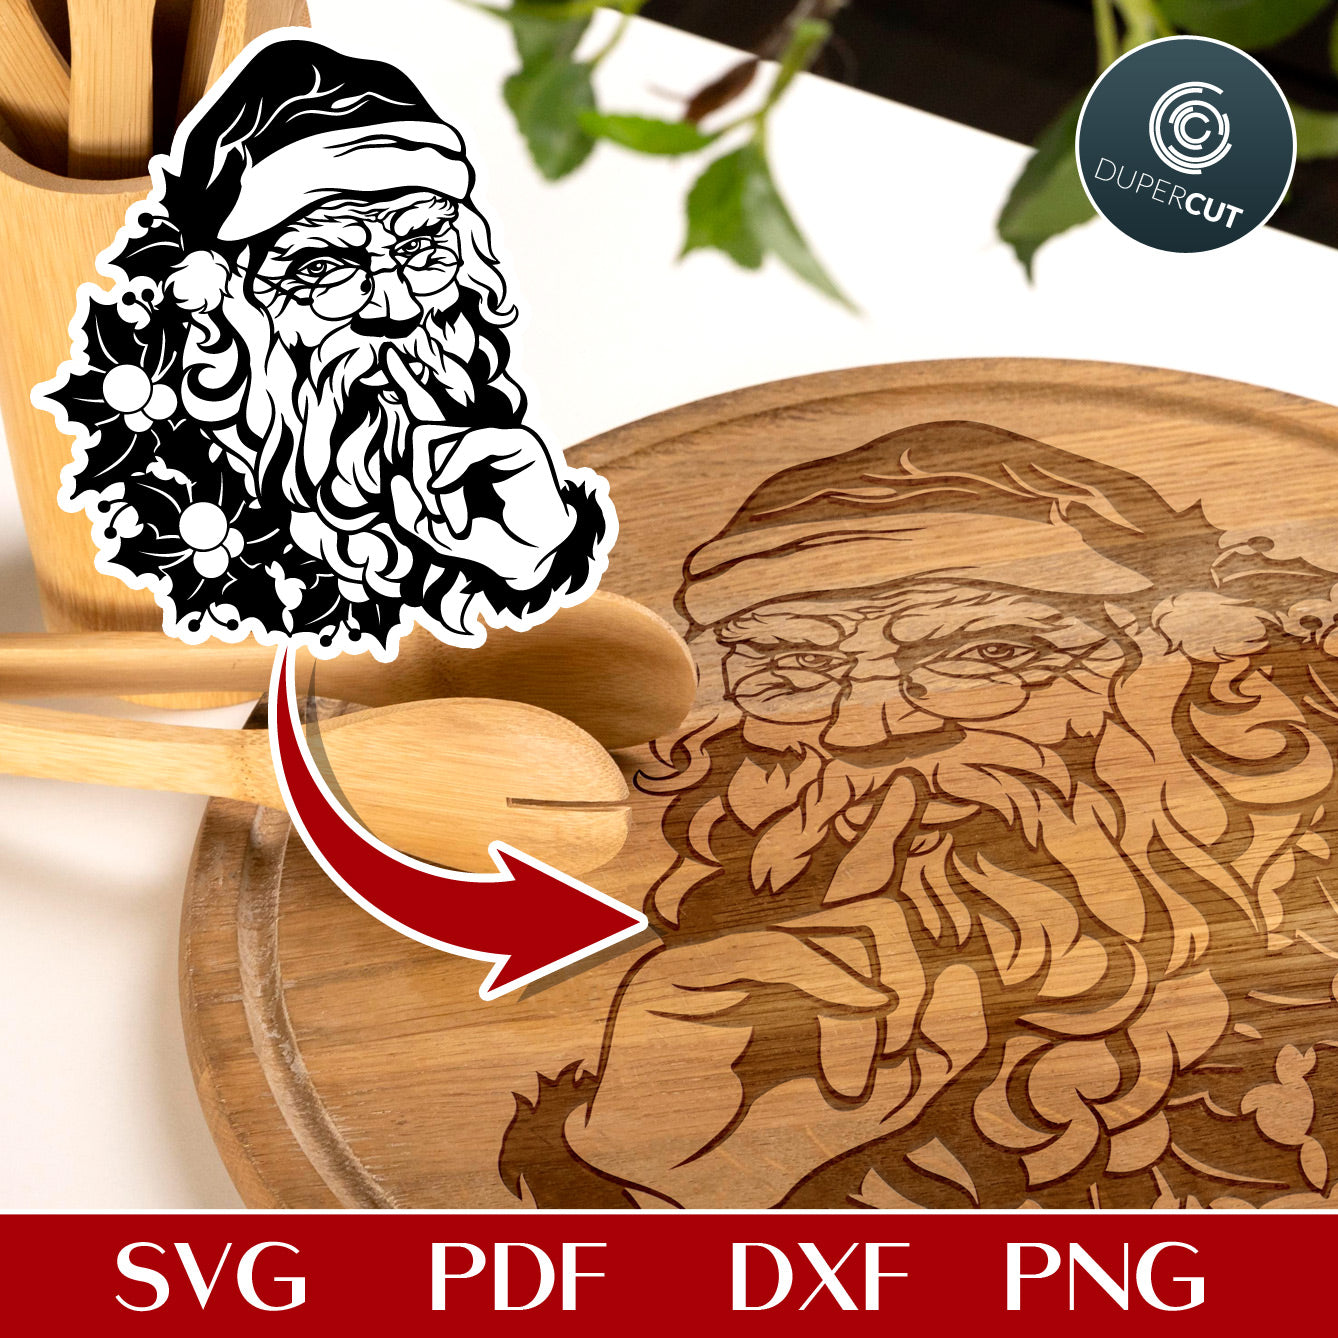 Santa with finger on his lips, Christmas ornament engraving for laser machines, Glowforge, CNC plasma - SVG PDF DXF cutting files